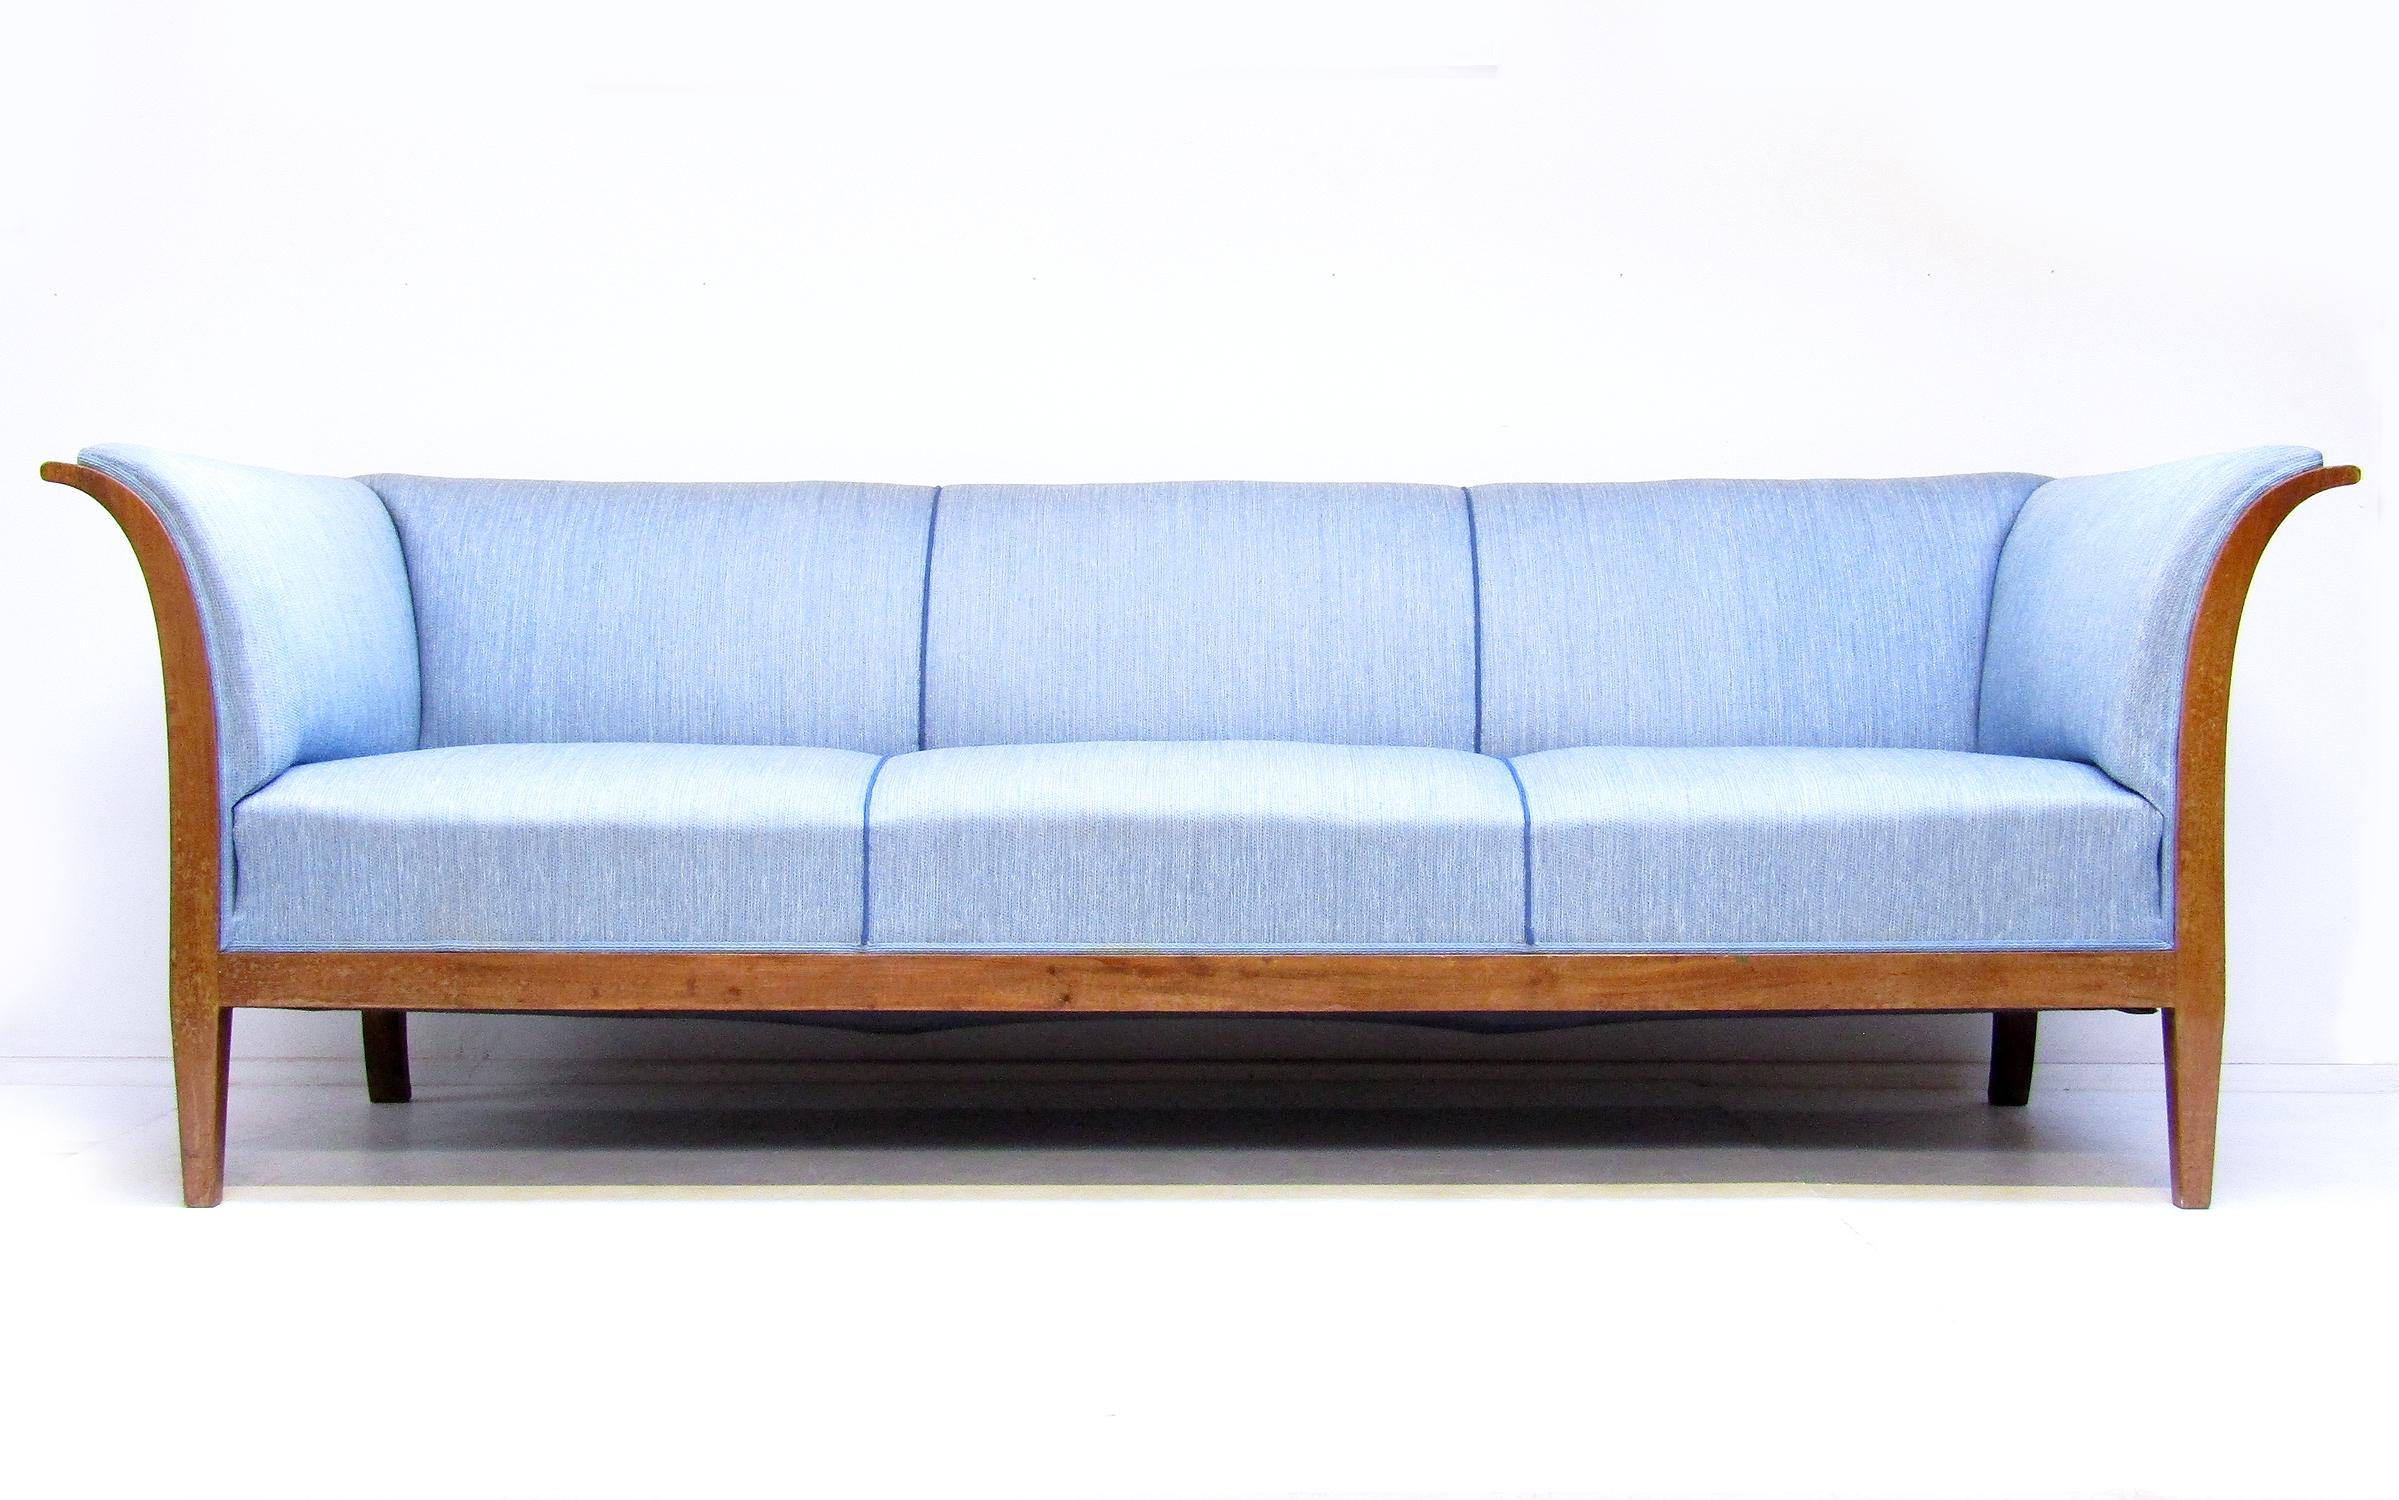 A striking 3-seater sofa in Cuban mahogany and pale blue fabric by Frits Henningsen.

In competition with his teacher Kaare Klint, Henningsen was one of the outstanding Danish designers of the early 20th century. A central aim was to modernise and